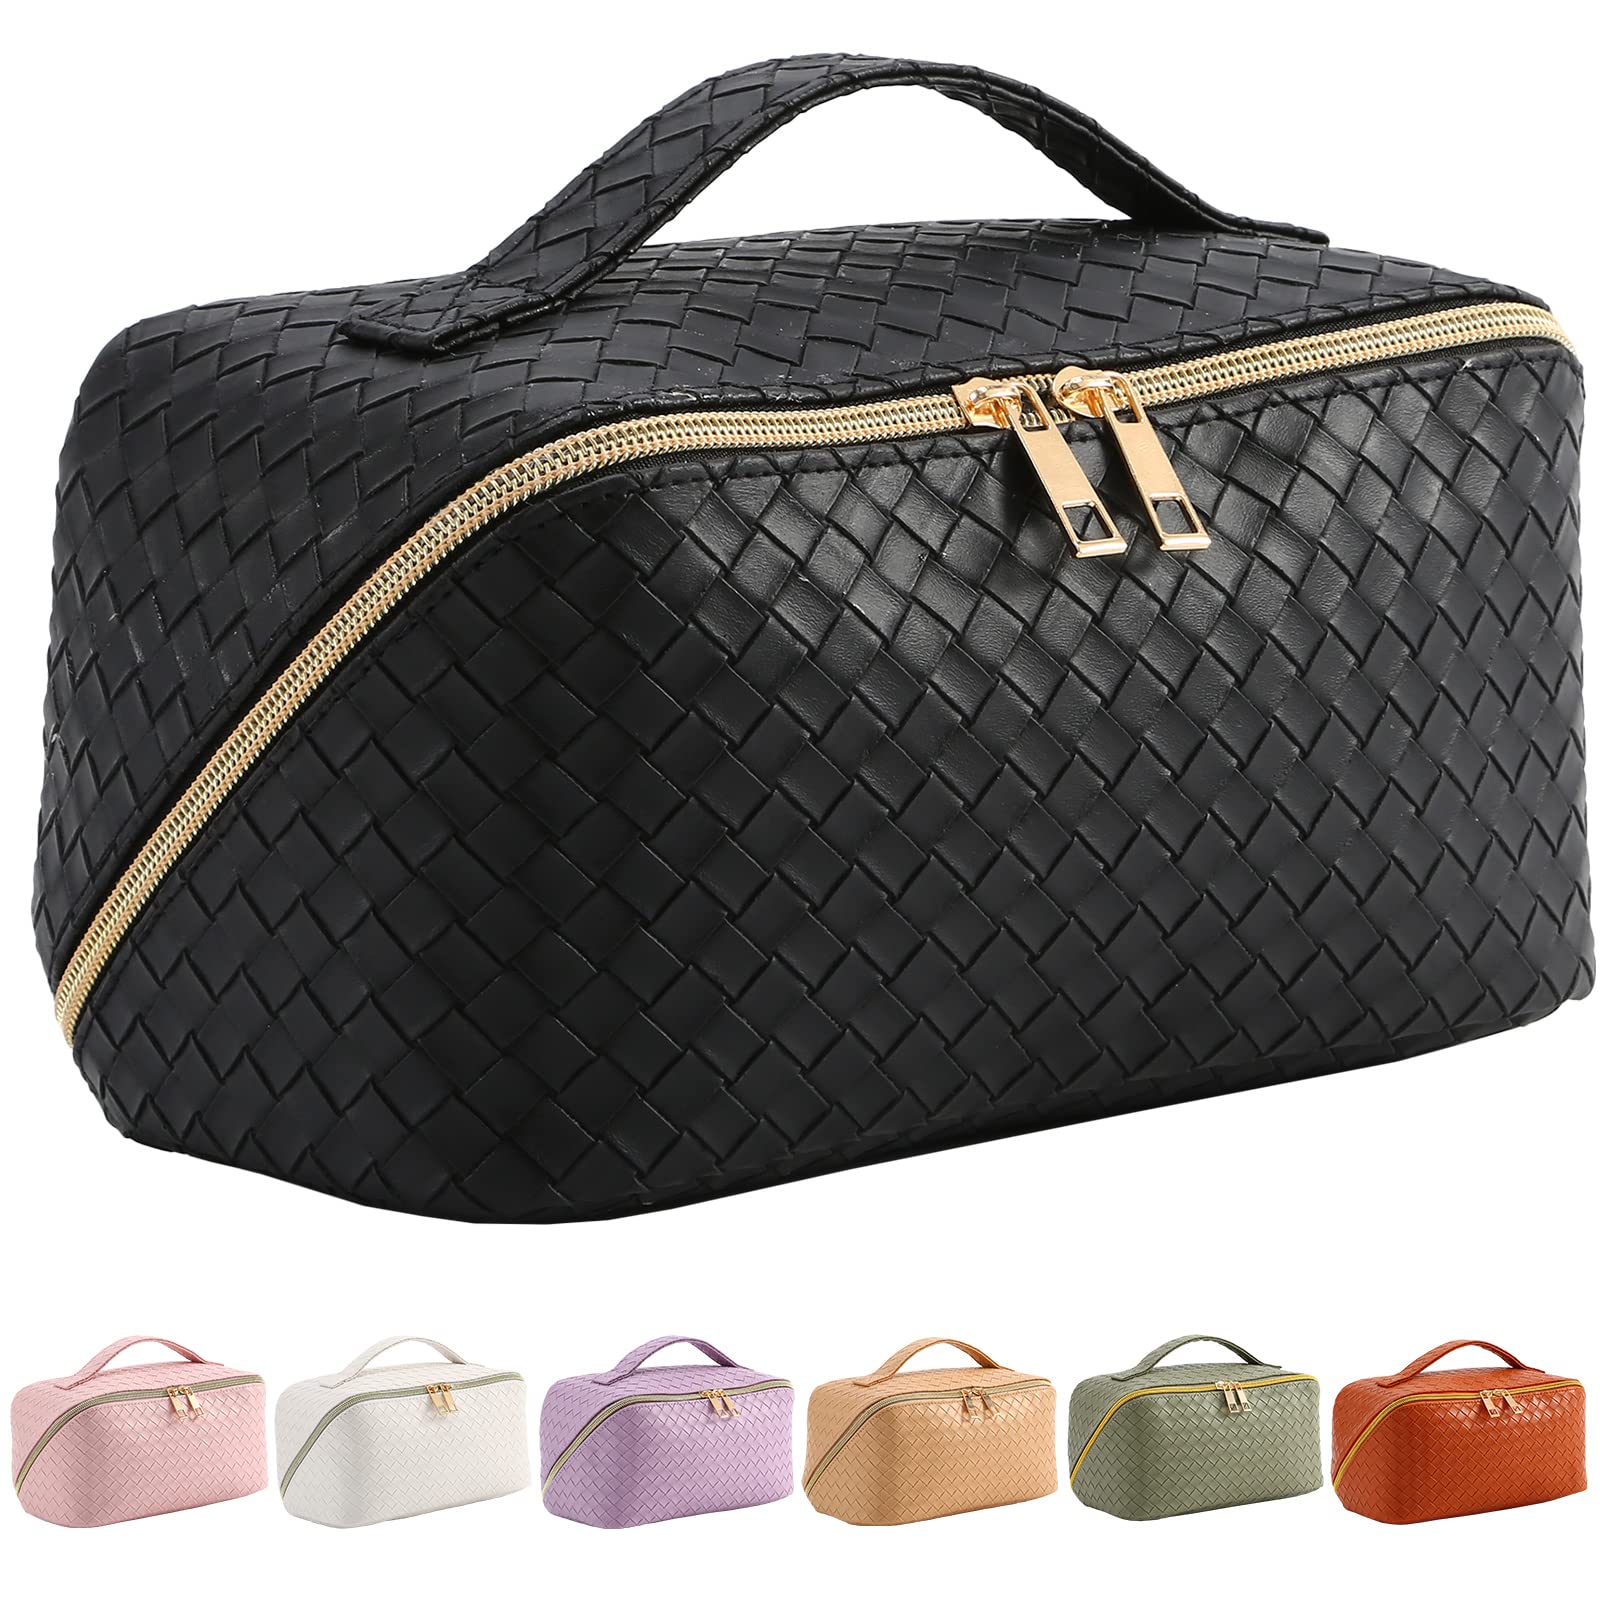 Pu Travel Makeup Bag With Handle - Small Cosmetic Bag For Purse